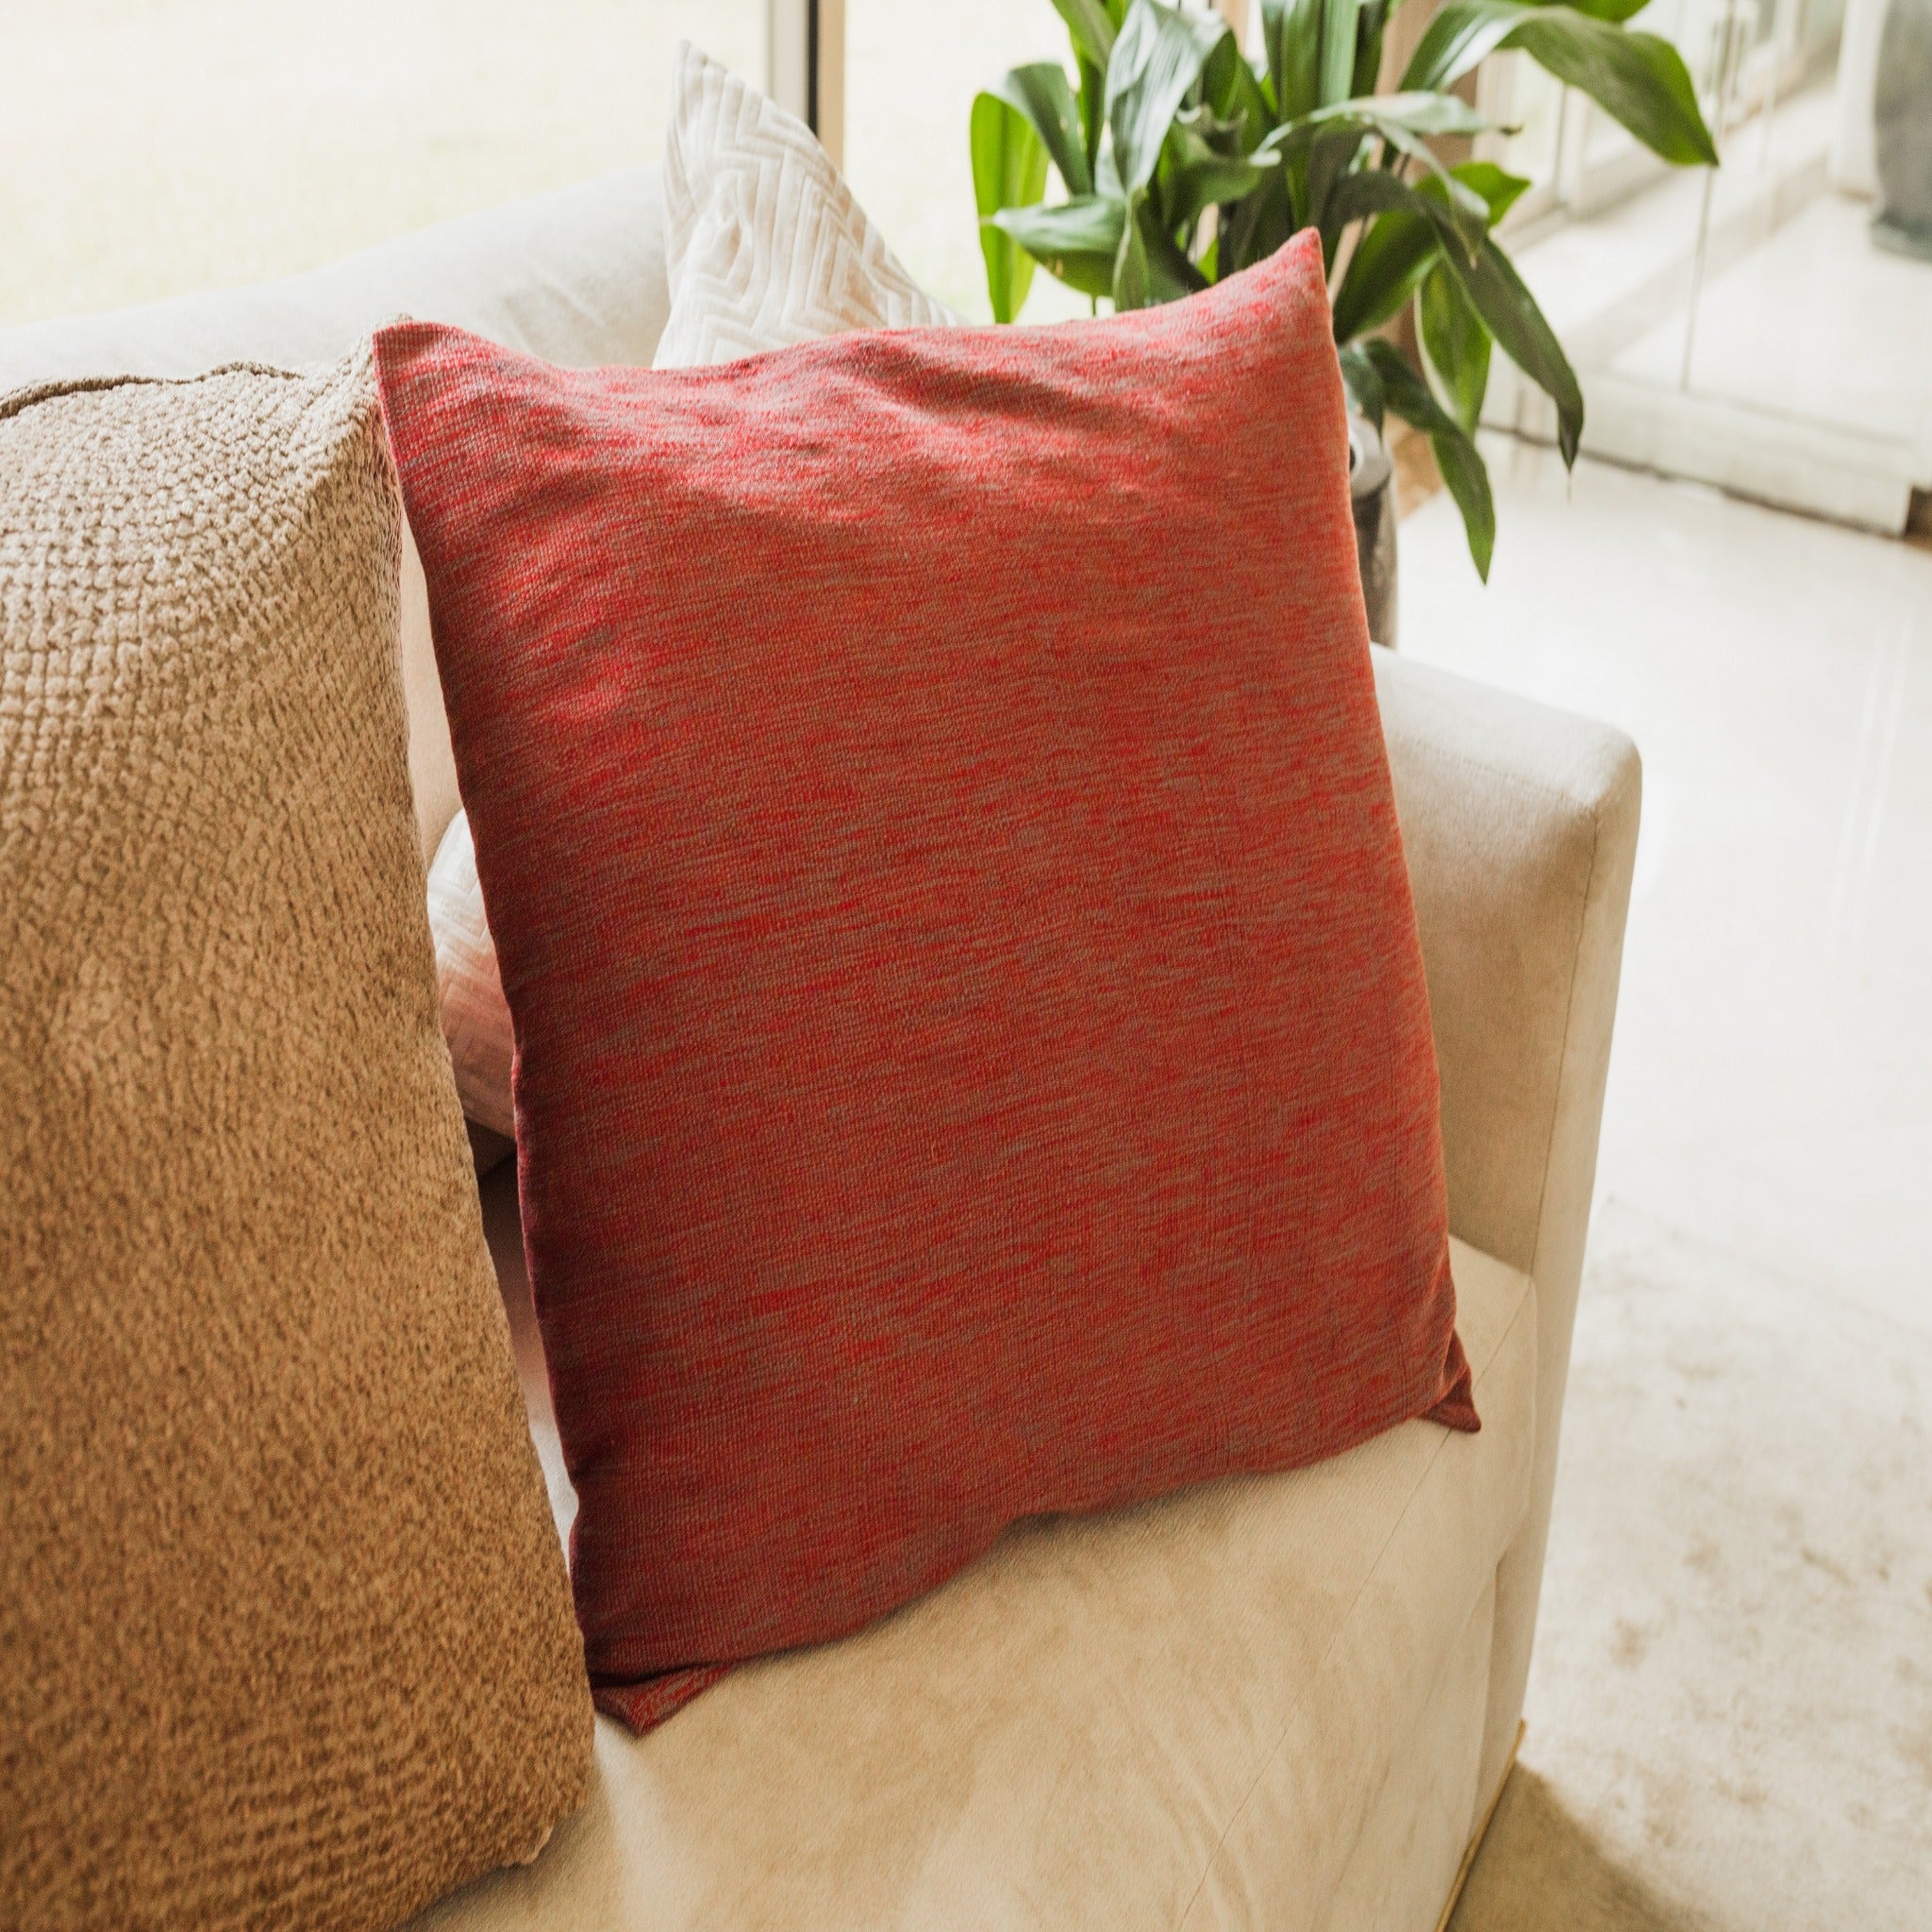 RED WITH GRAY CUSHION COVER